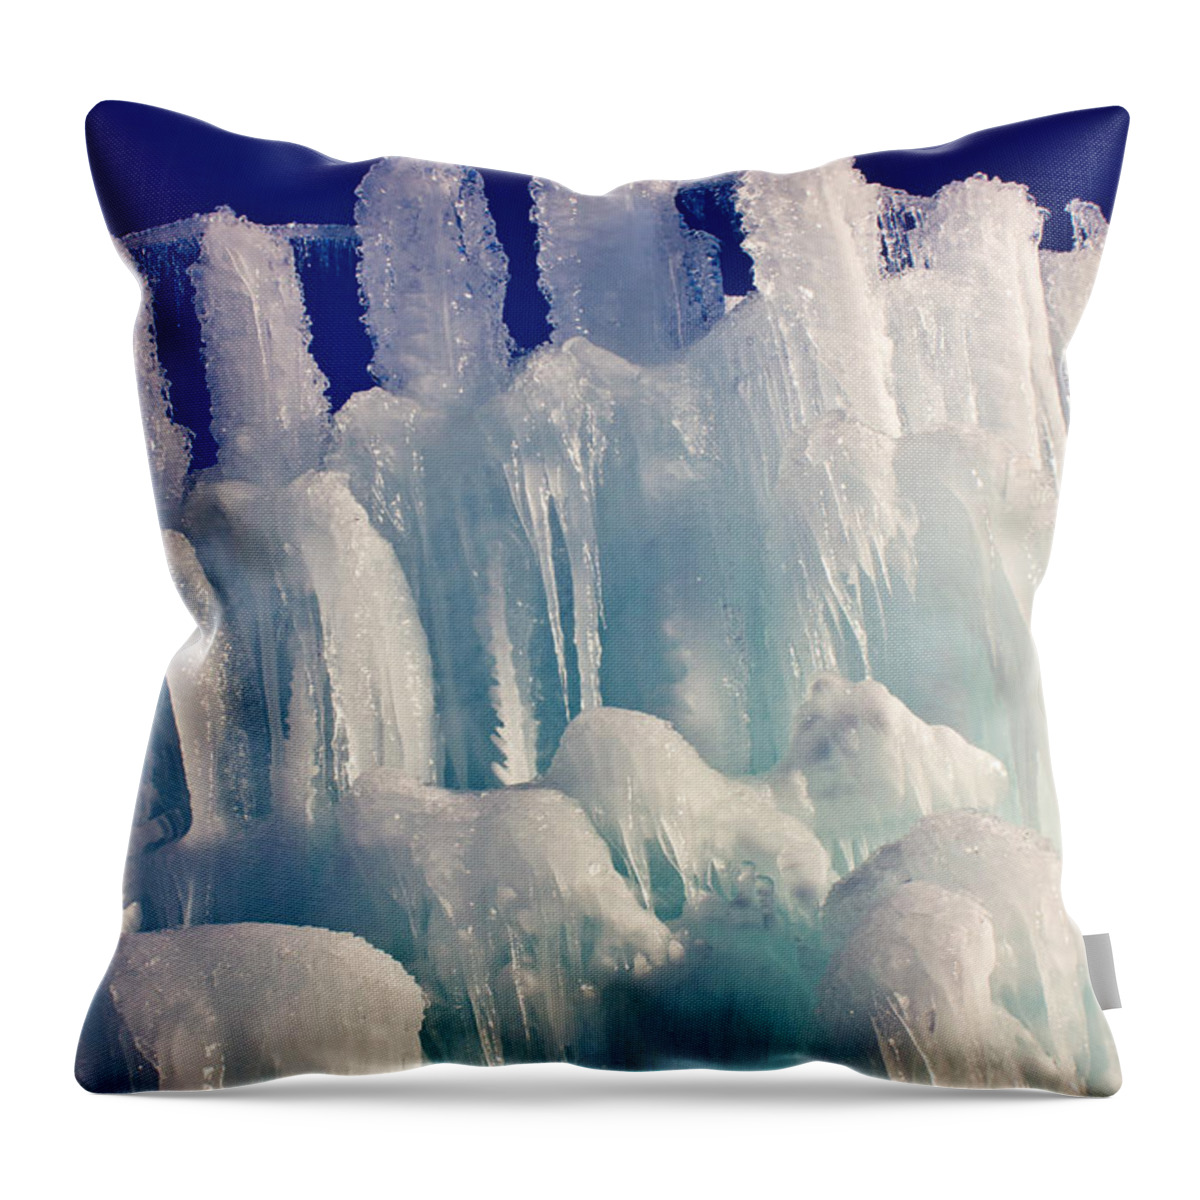 2013 Throw Pillow featuring the photograph Ice Abstract 1 by Christie Kowalski